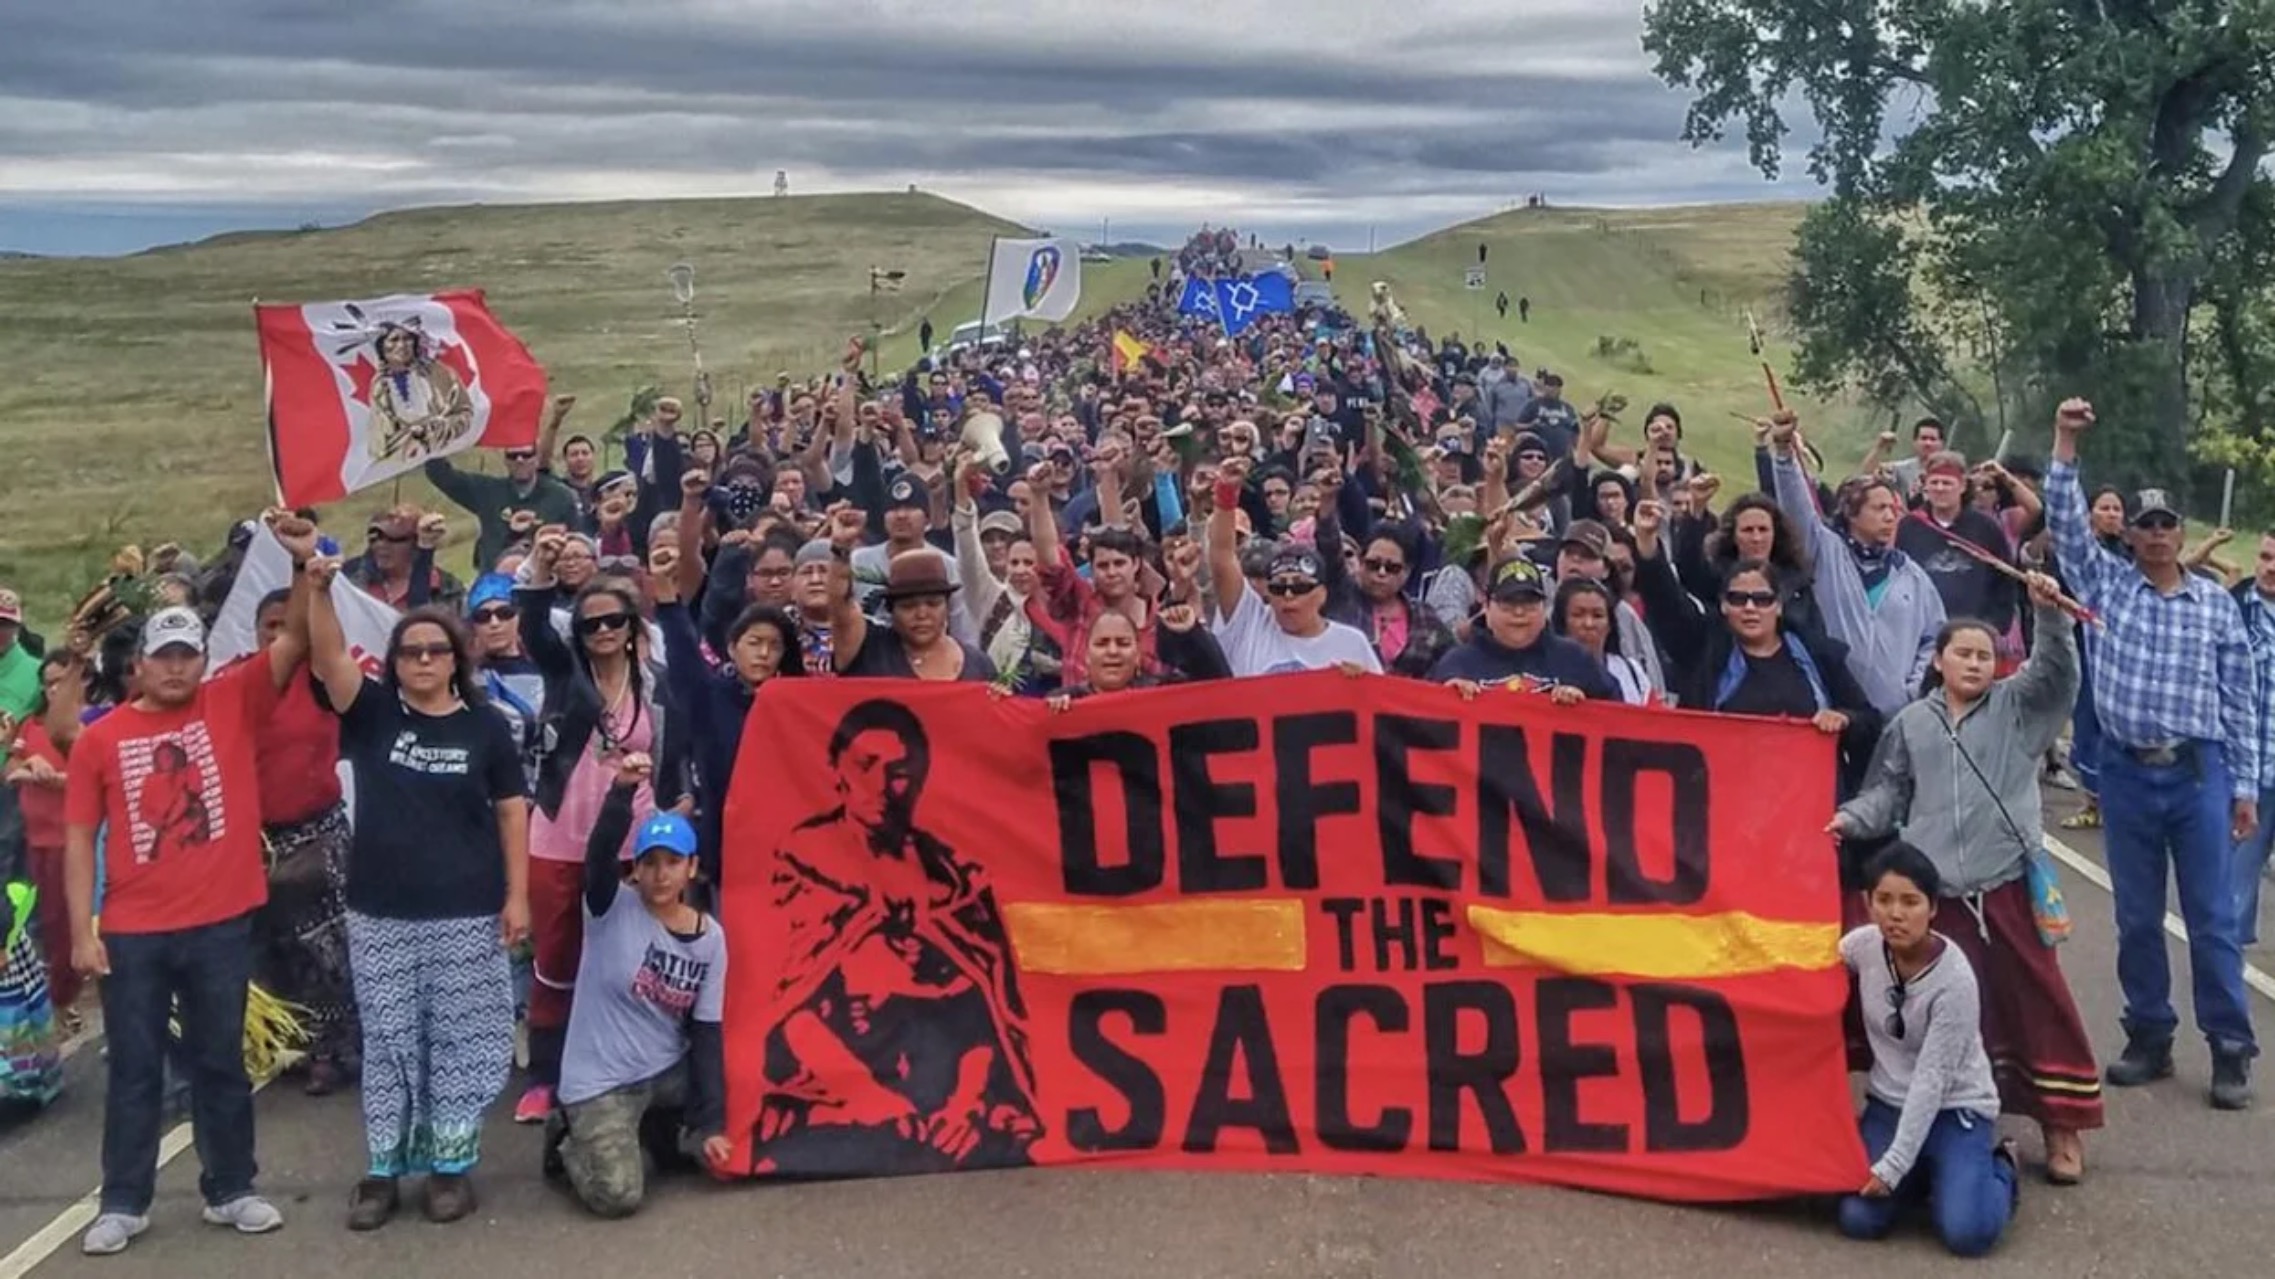 Meanwhile, Indigenous peoples continue to put their bodies on the line for Mother Earth. False solutions do not address the climate emergency at its root, and instead have damaging impacts like continued land grabs from Indigenous Peoples in the Global South.